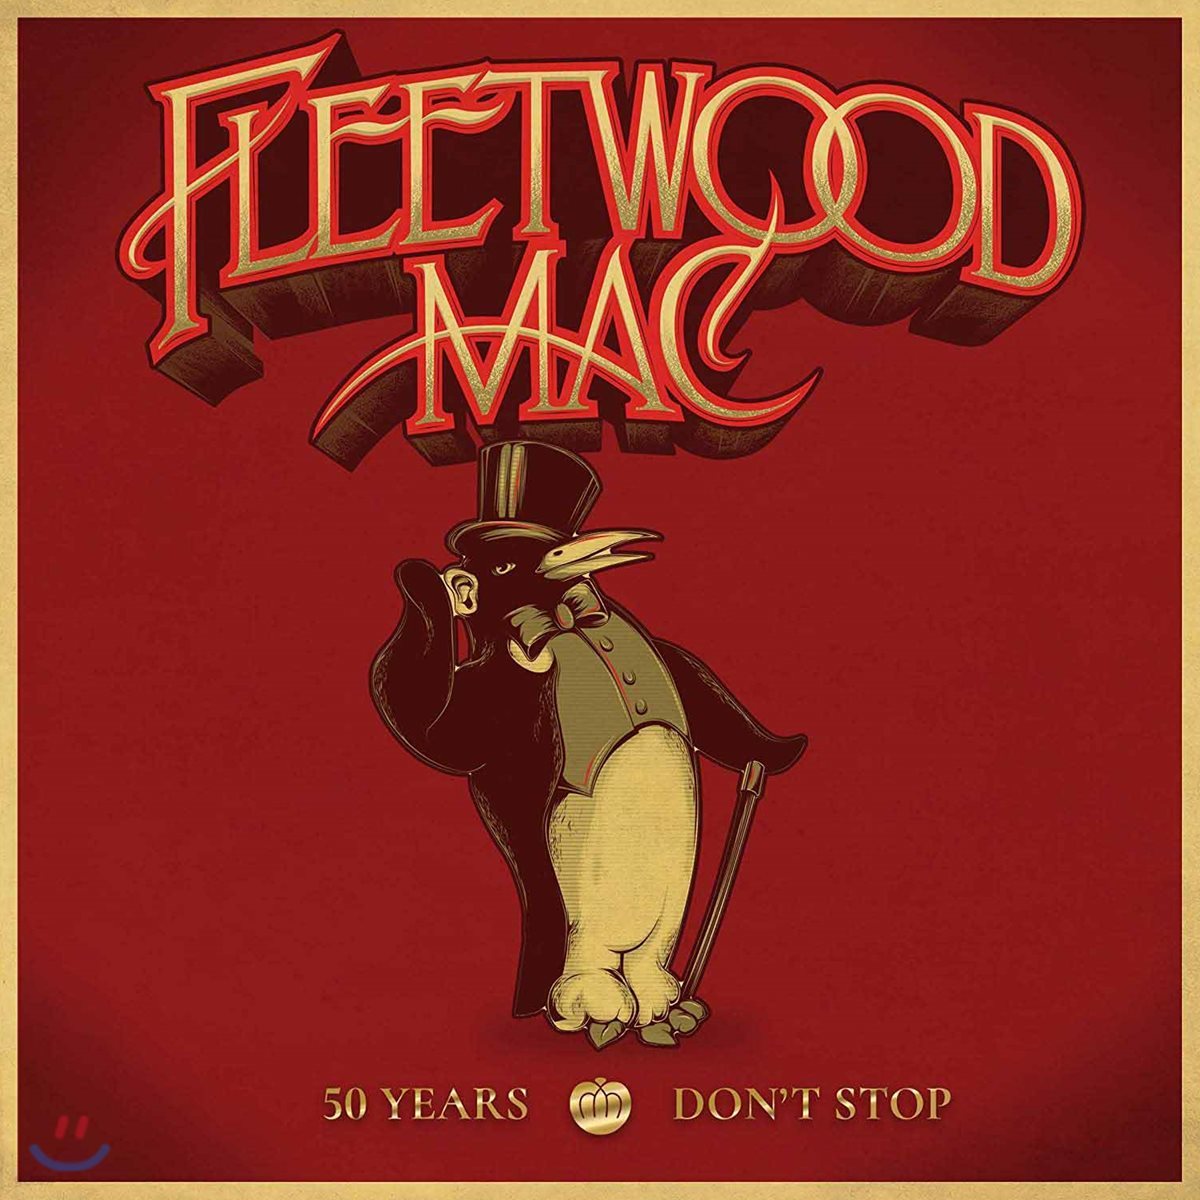 Fleetwood Mac (플리트우드 맥) - 50 Years - Don't Stop [5LP Deluxe Edition Boxset]